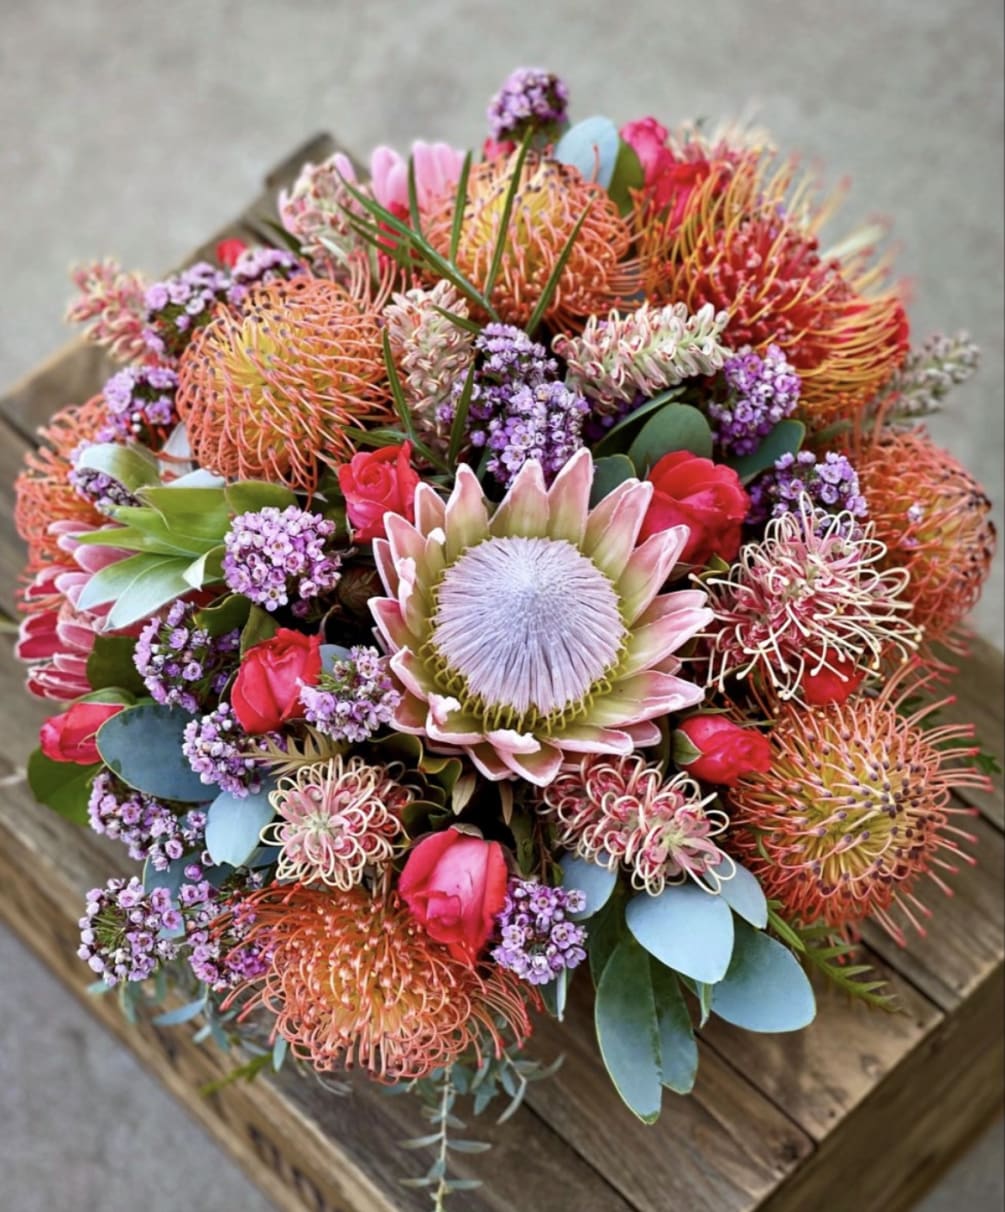 Floral arrangements with protea are not only visually stunning but also symbolize